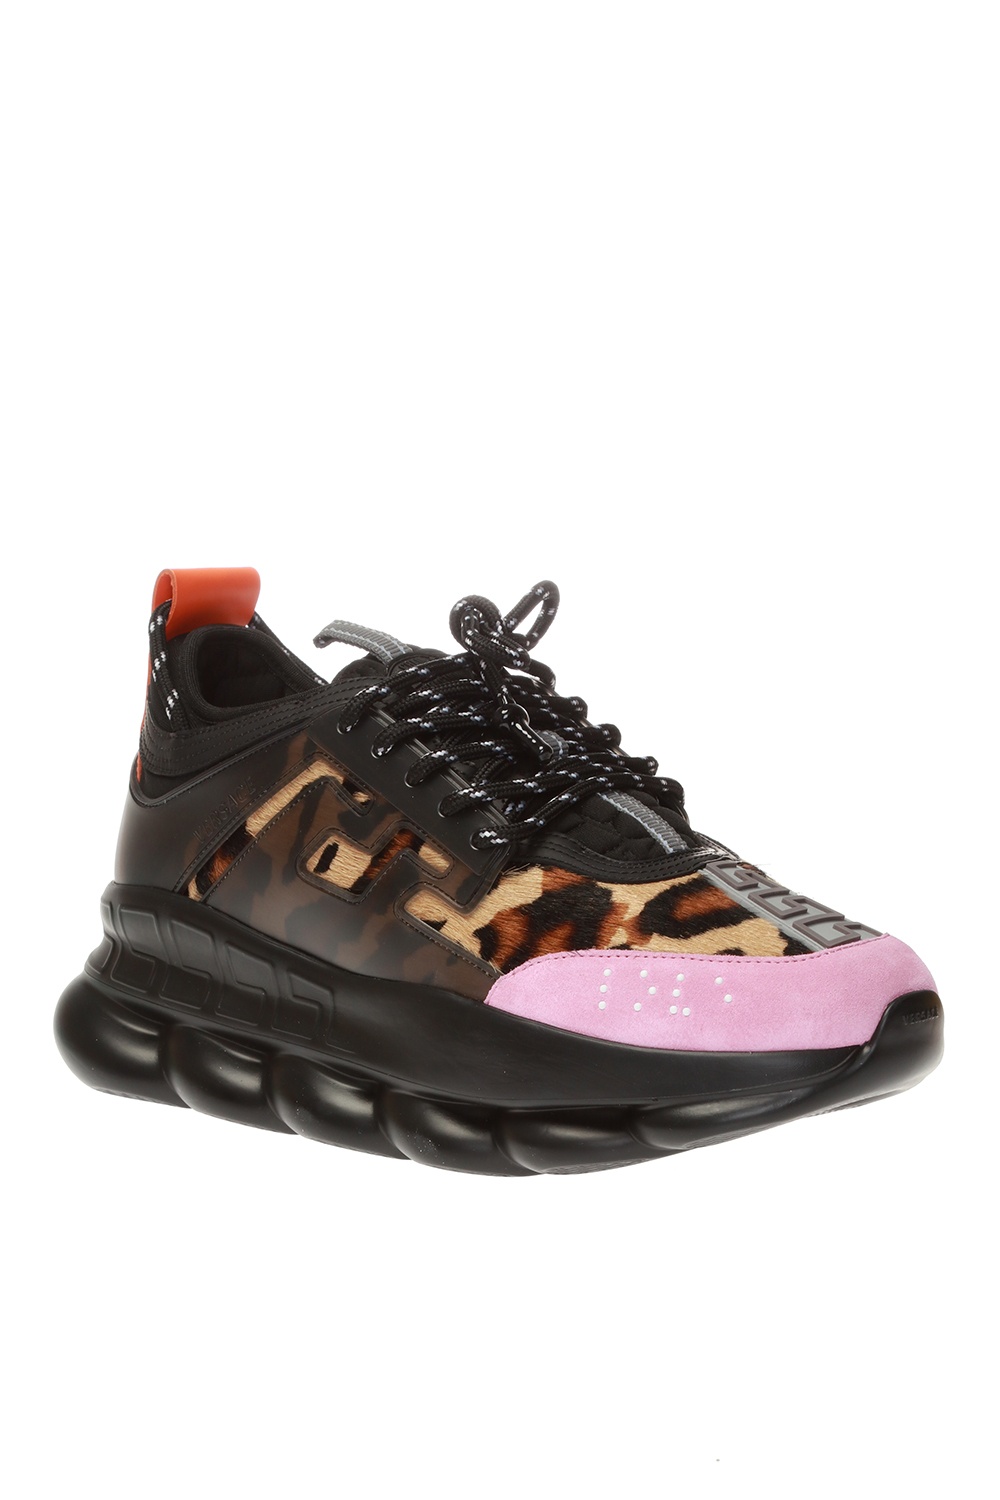 versace chain reaction pink